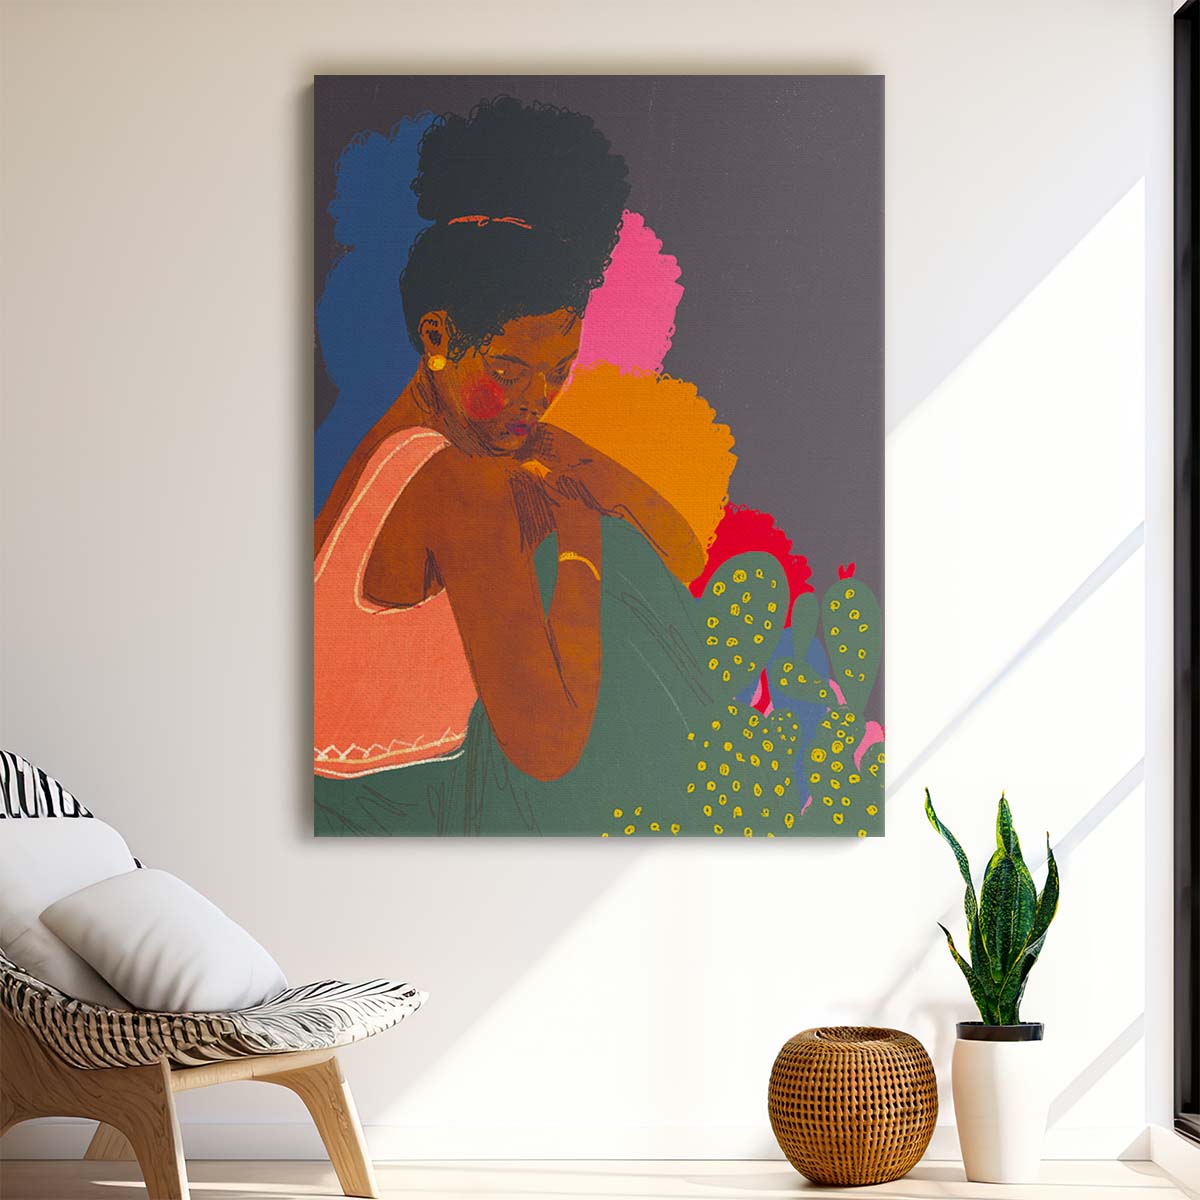 Colorful Figurative Illustration of Resting Black Woman by Gigi Rosado by Luxuriance Designs, made in USA